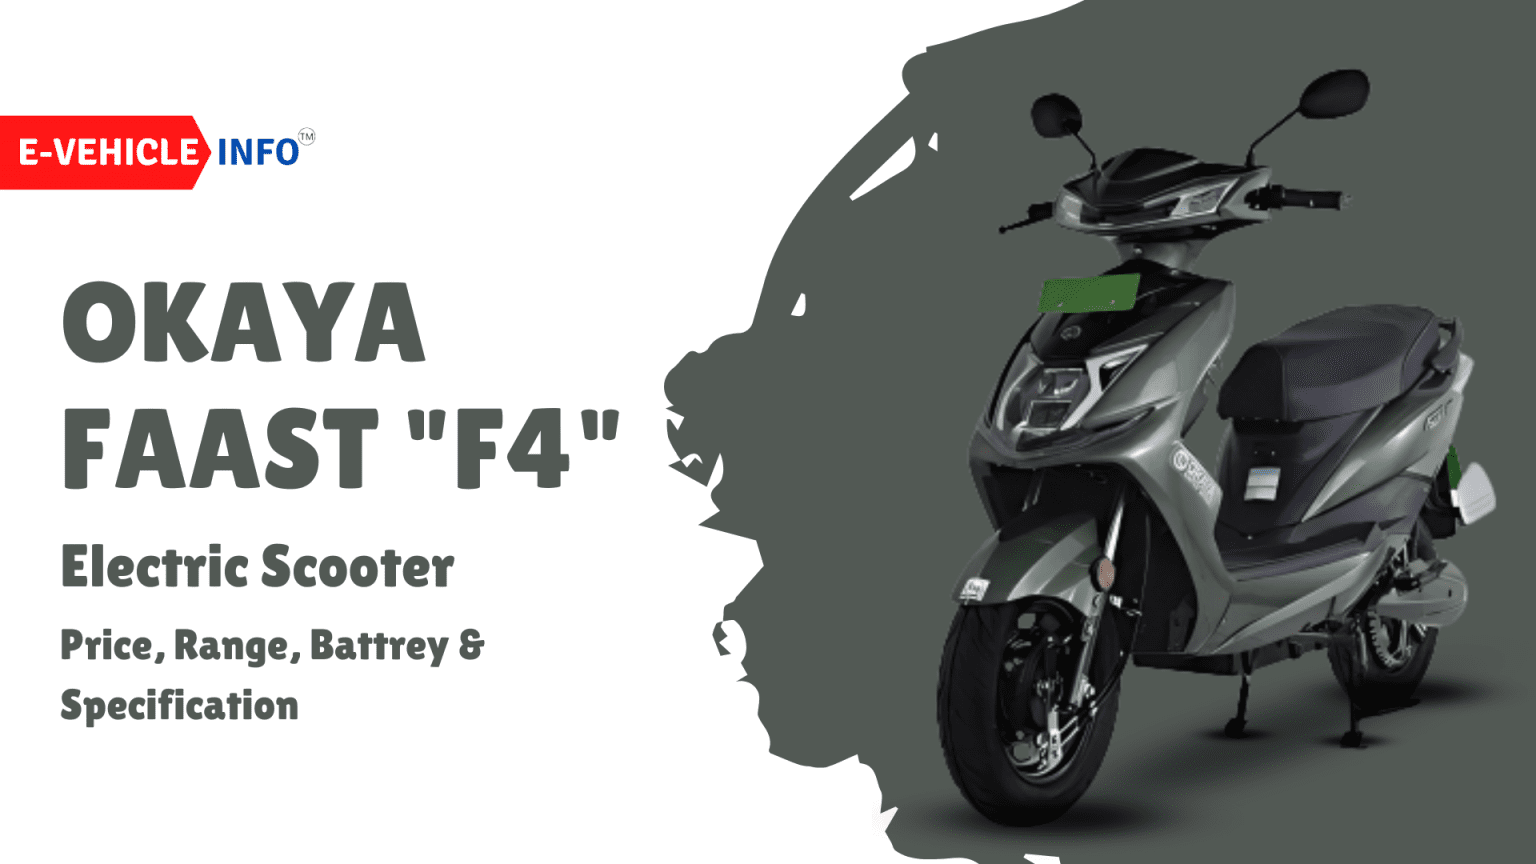 Okaya Faast F4 Electric Scooter Price, Range, & Specifications